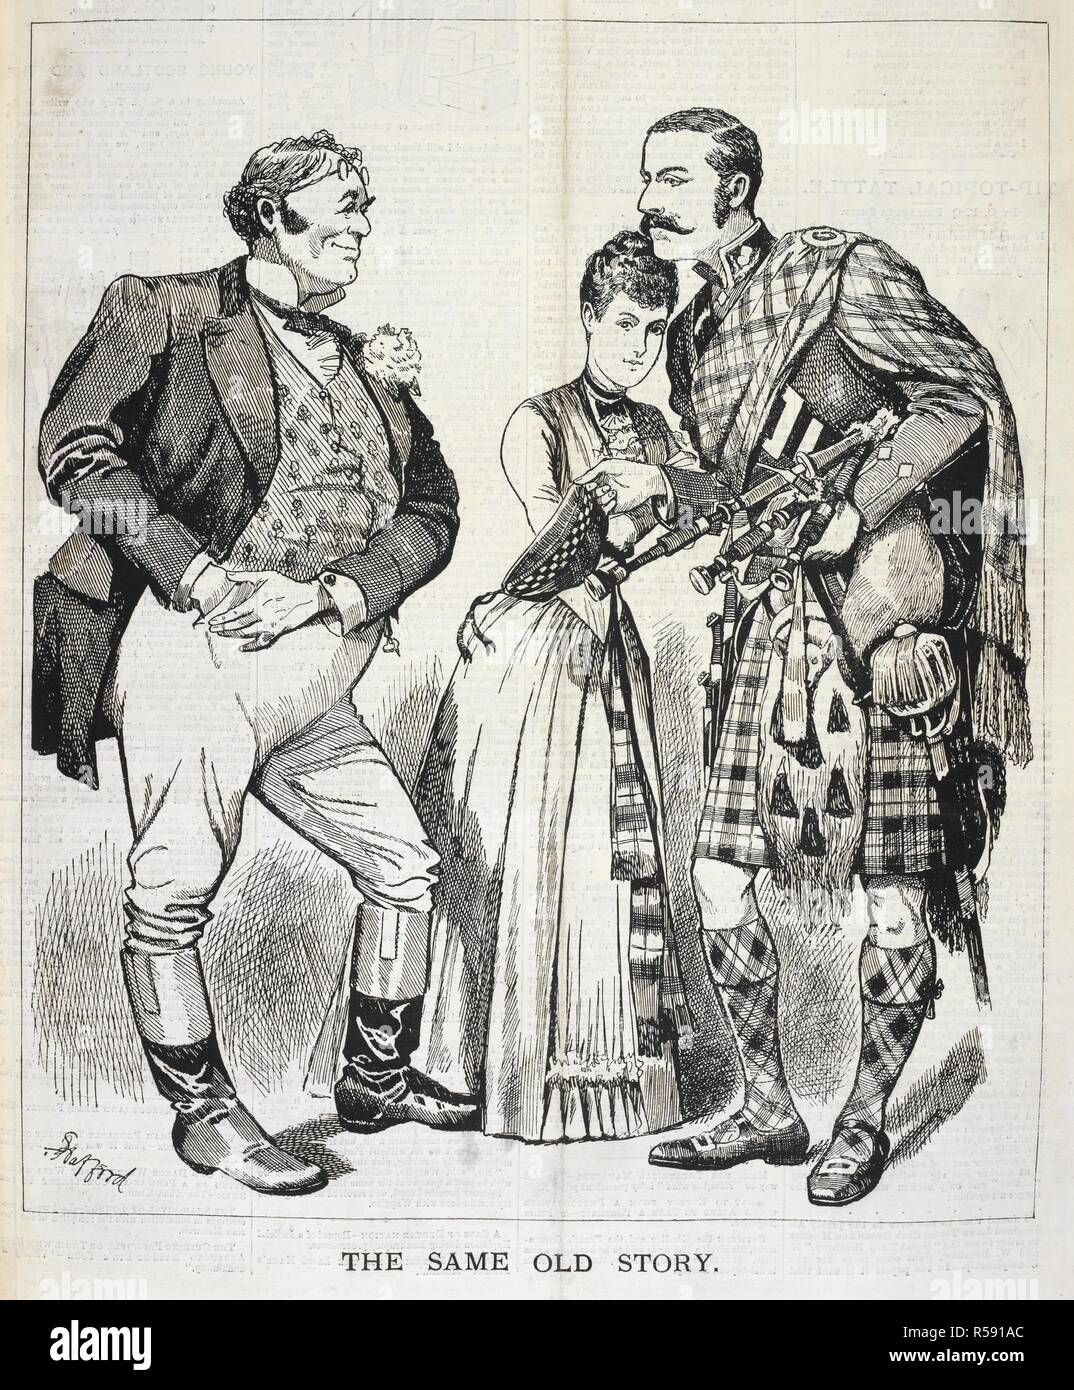 The same old story'. Two men, one a Scotsman, and a woman. Funny folks. : A  weekly